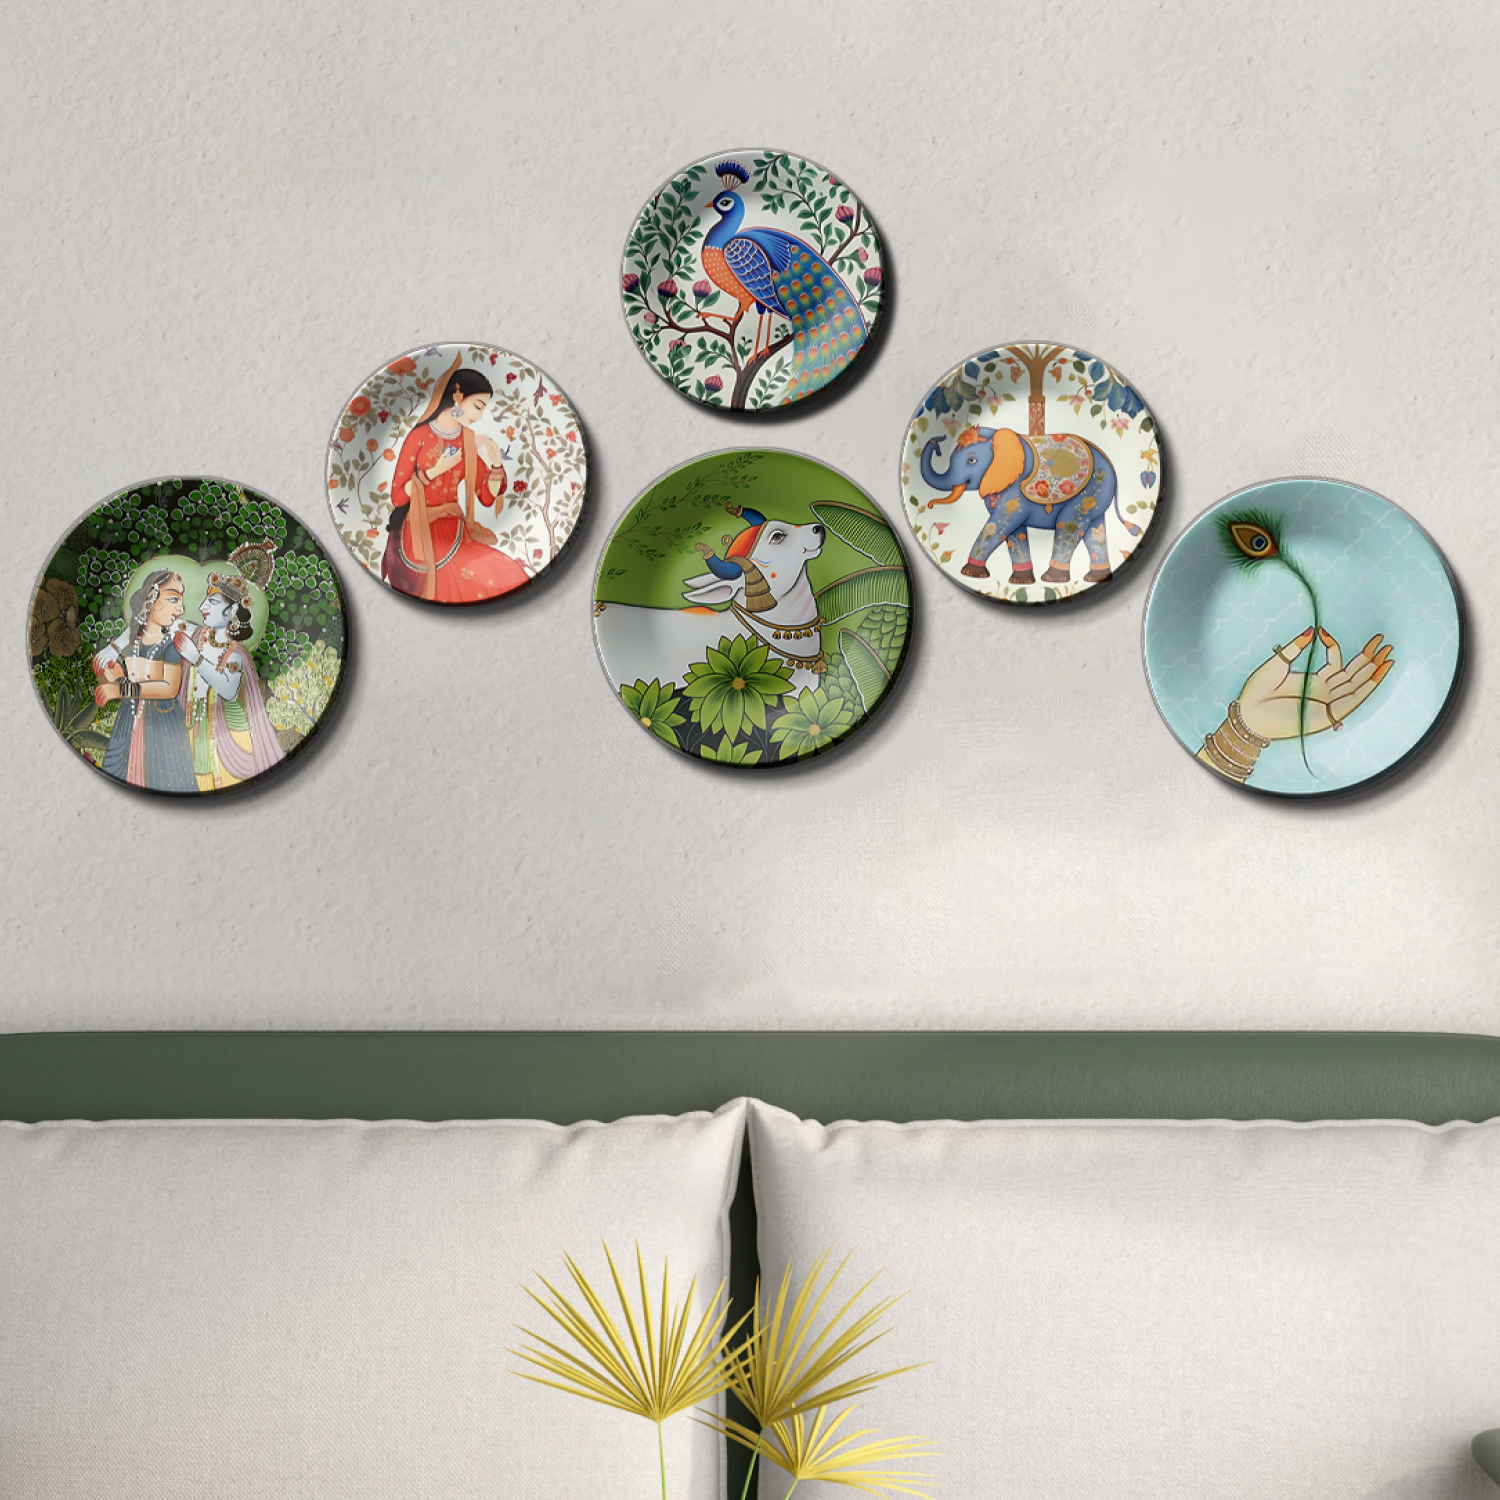 Set of 6 Plates Featuring Sacred Symbols, Deities, and Rituals hanging plates on wall